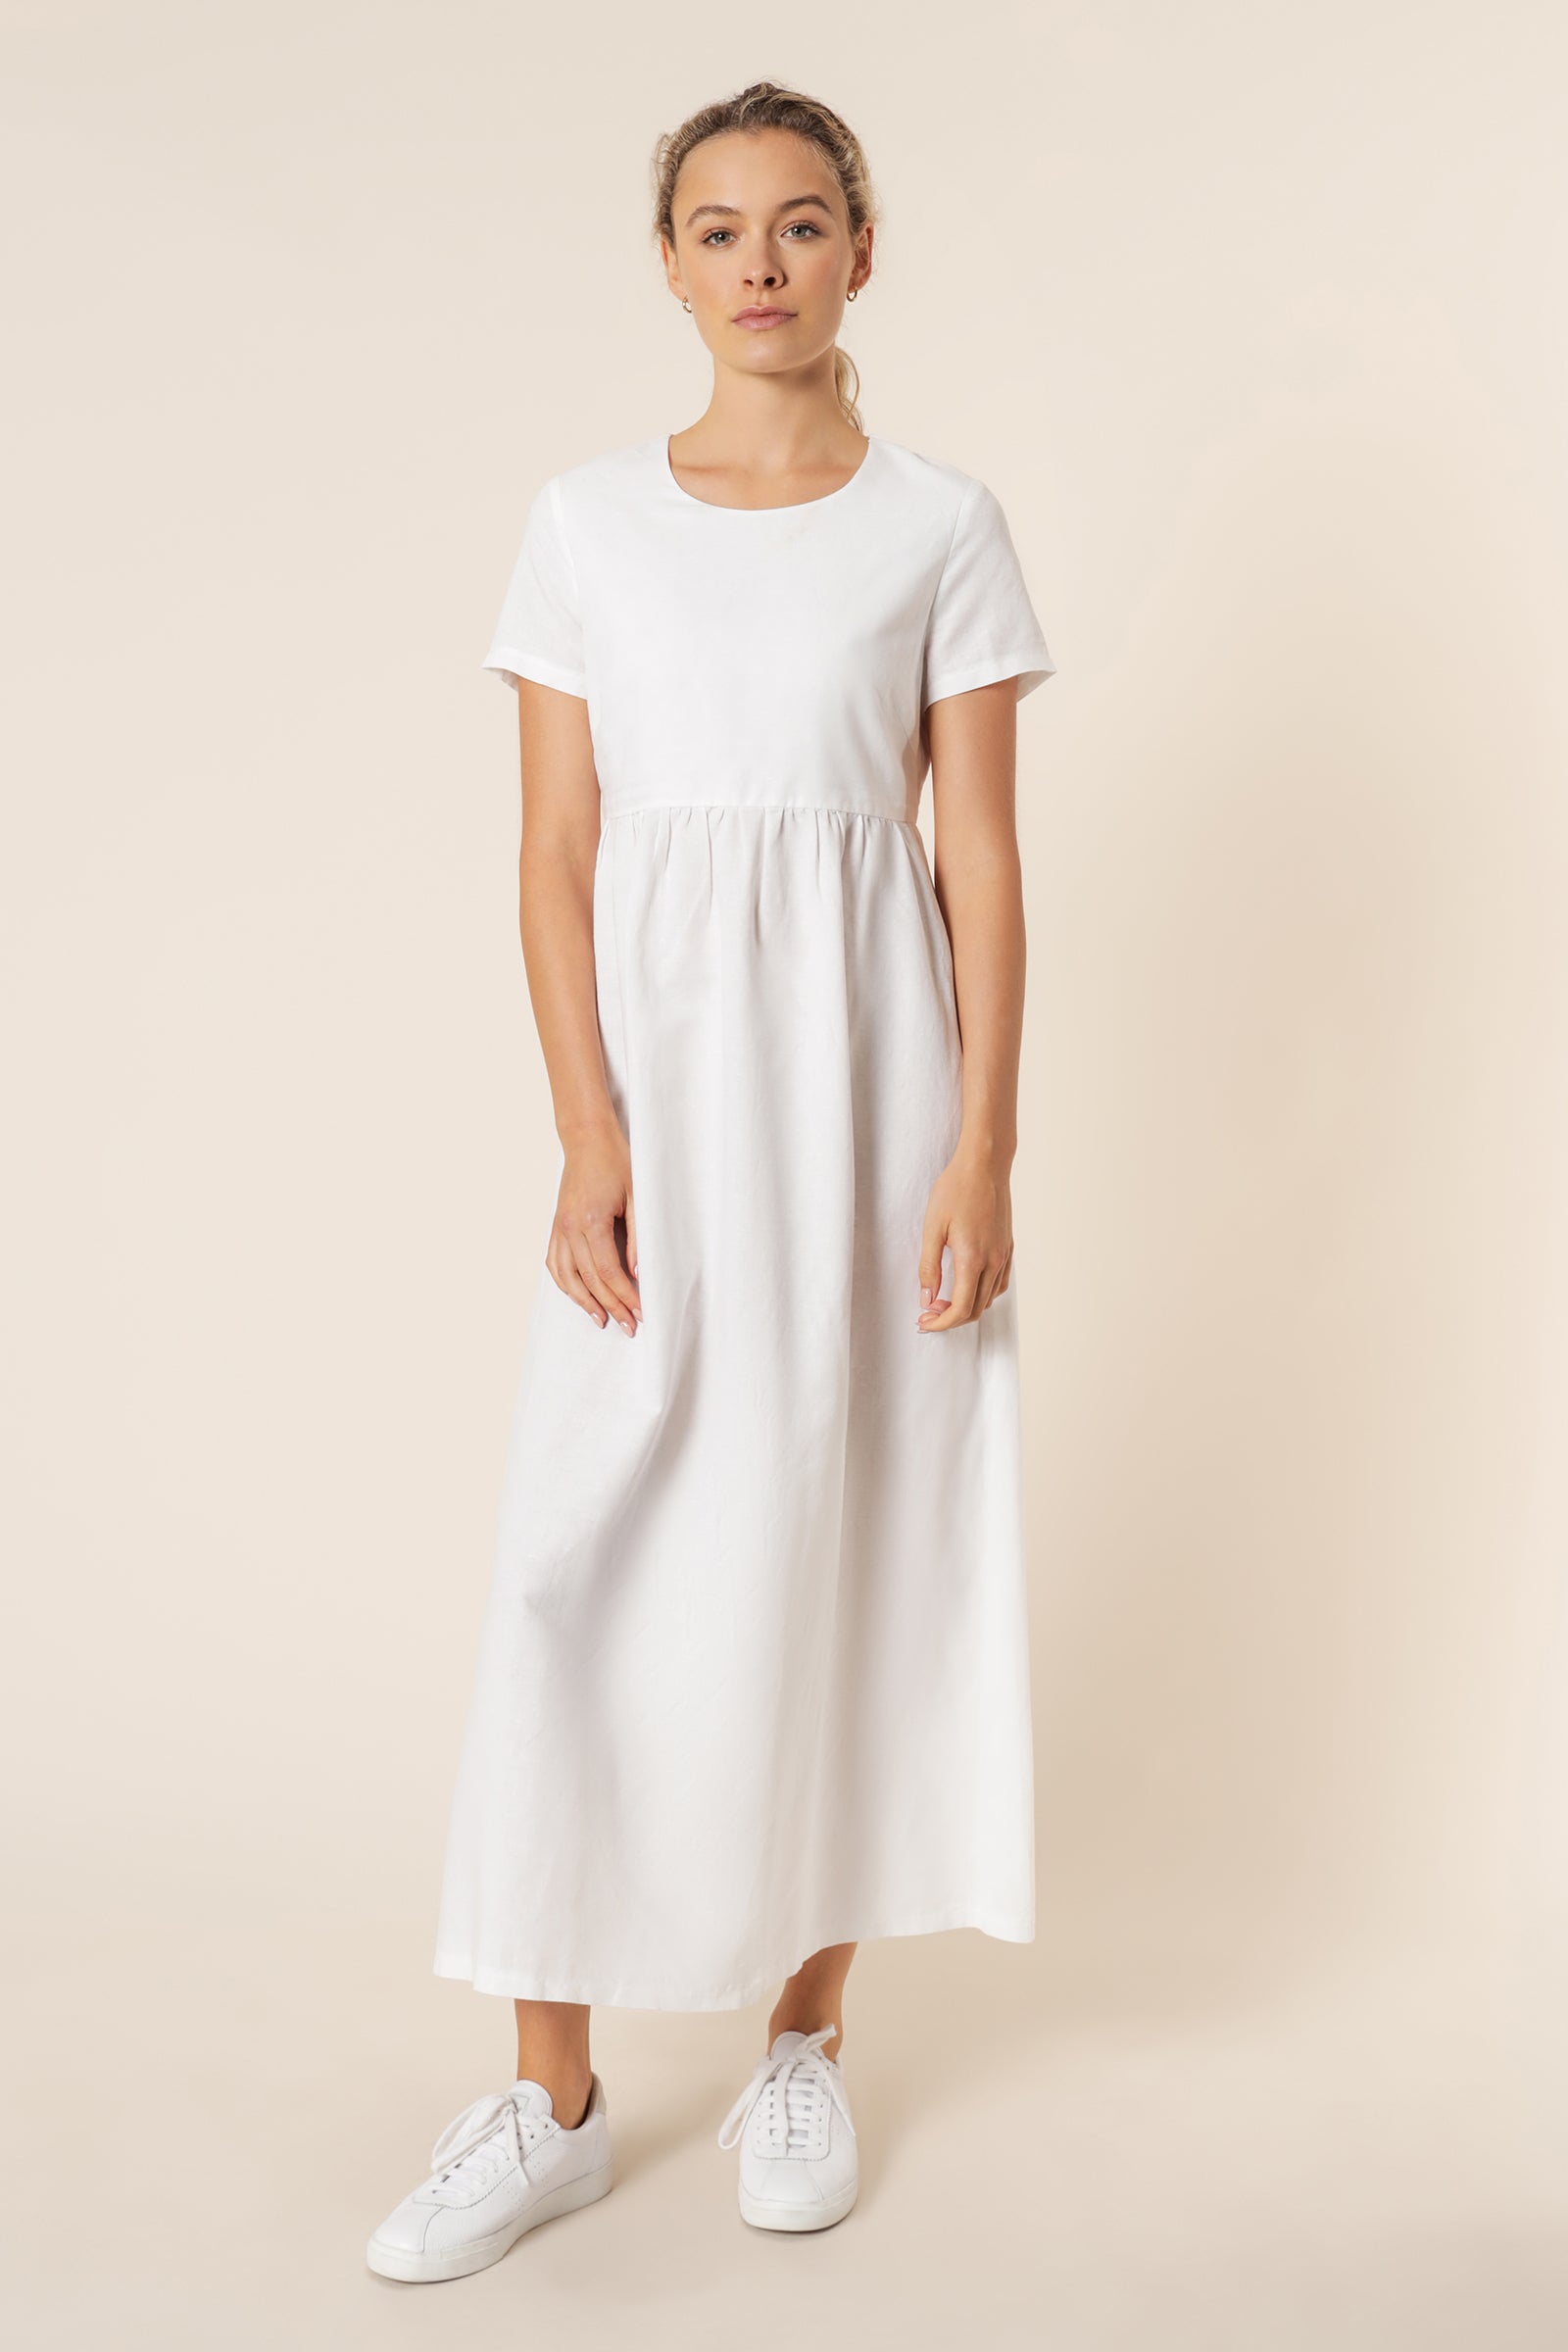 Nude Lucy Claudia Linen Maxi Dress White Dress 